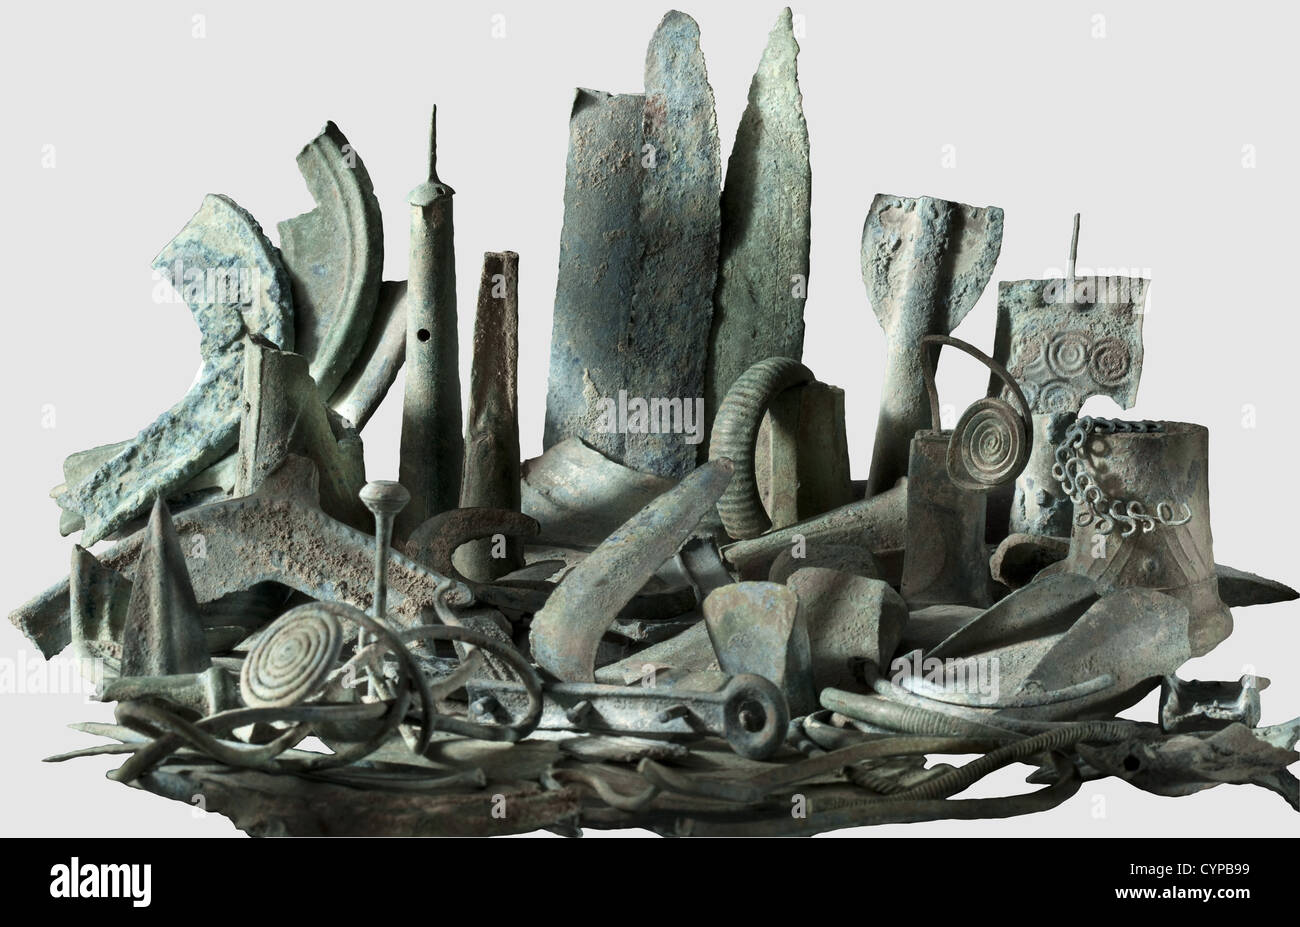 A Bronze Age hoard find,Central Danube area,1300 - 1100 B.C. Consisting of 142 parts(weight: ca. 5 kg). 35 fragments of swords,daggers and saws,35 fragments of sickles,17 fragments of axes,3 fragments of lances,7 fragments of knives,12 pieces of bracelets and rings,19 wire neck rings and parts of rings,2 needles,6 parts of pendants and plate(partially decorated),1 wire of a fibula and 15 tutuli,buttons and fragments of sheaths. Excellent condition of the metal with green-blue surface,in uncleaned find condition. Collection Axel Guttmann(no inve,Additional-Rights-Clearences-Not Available Stock Photo